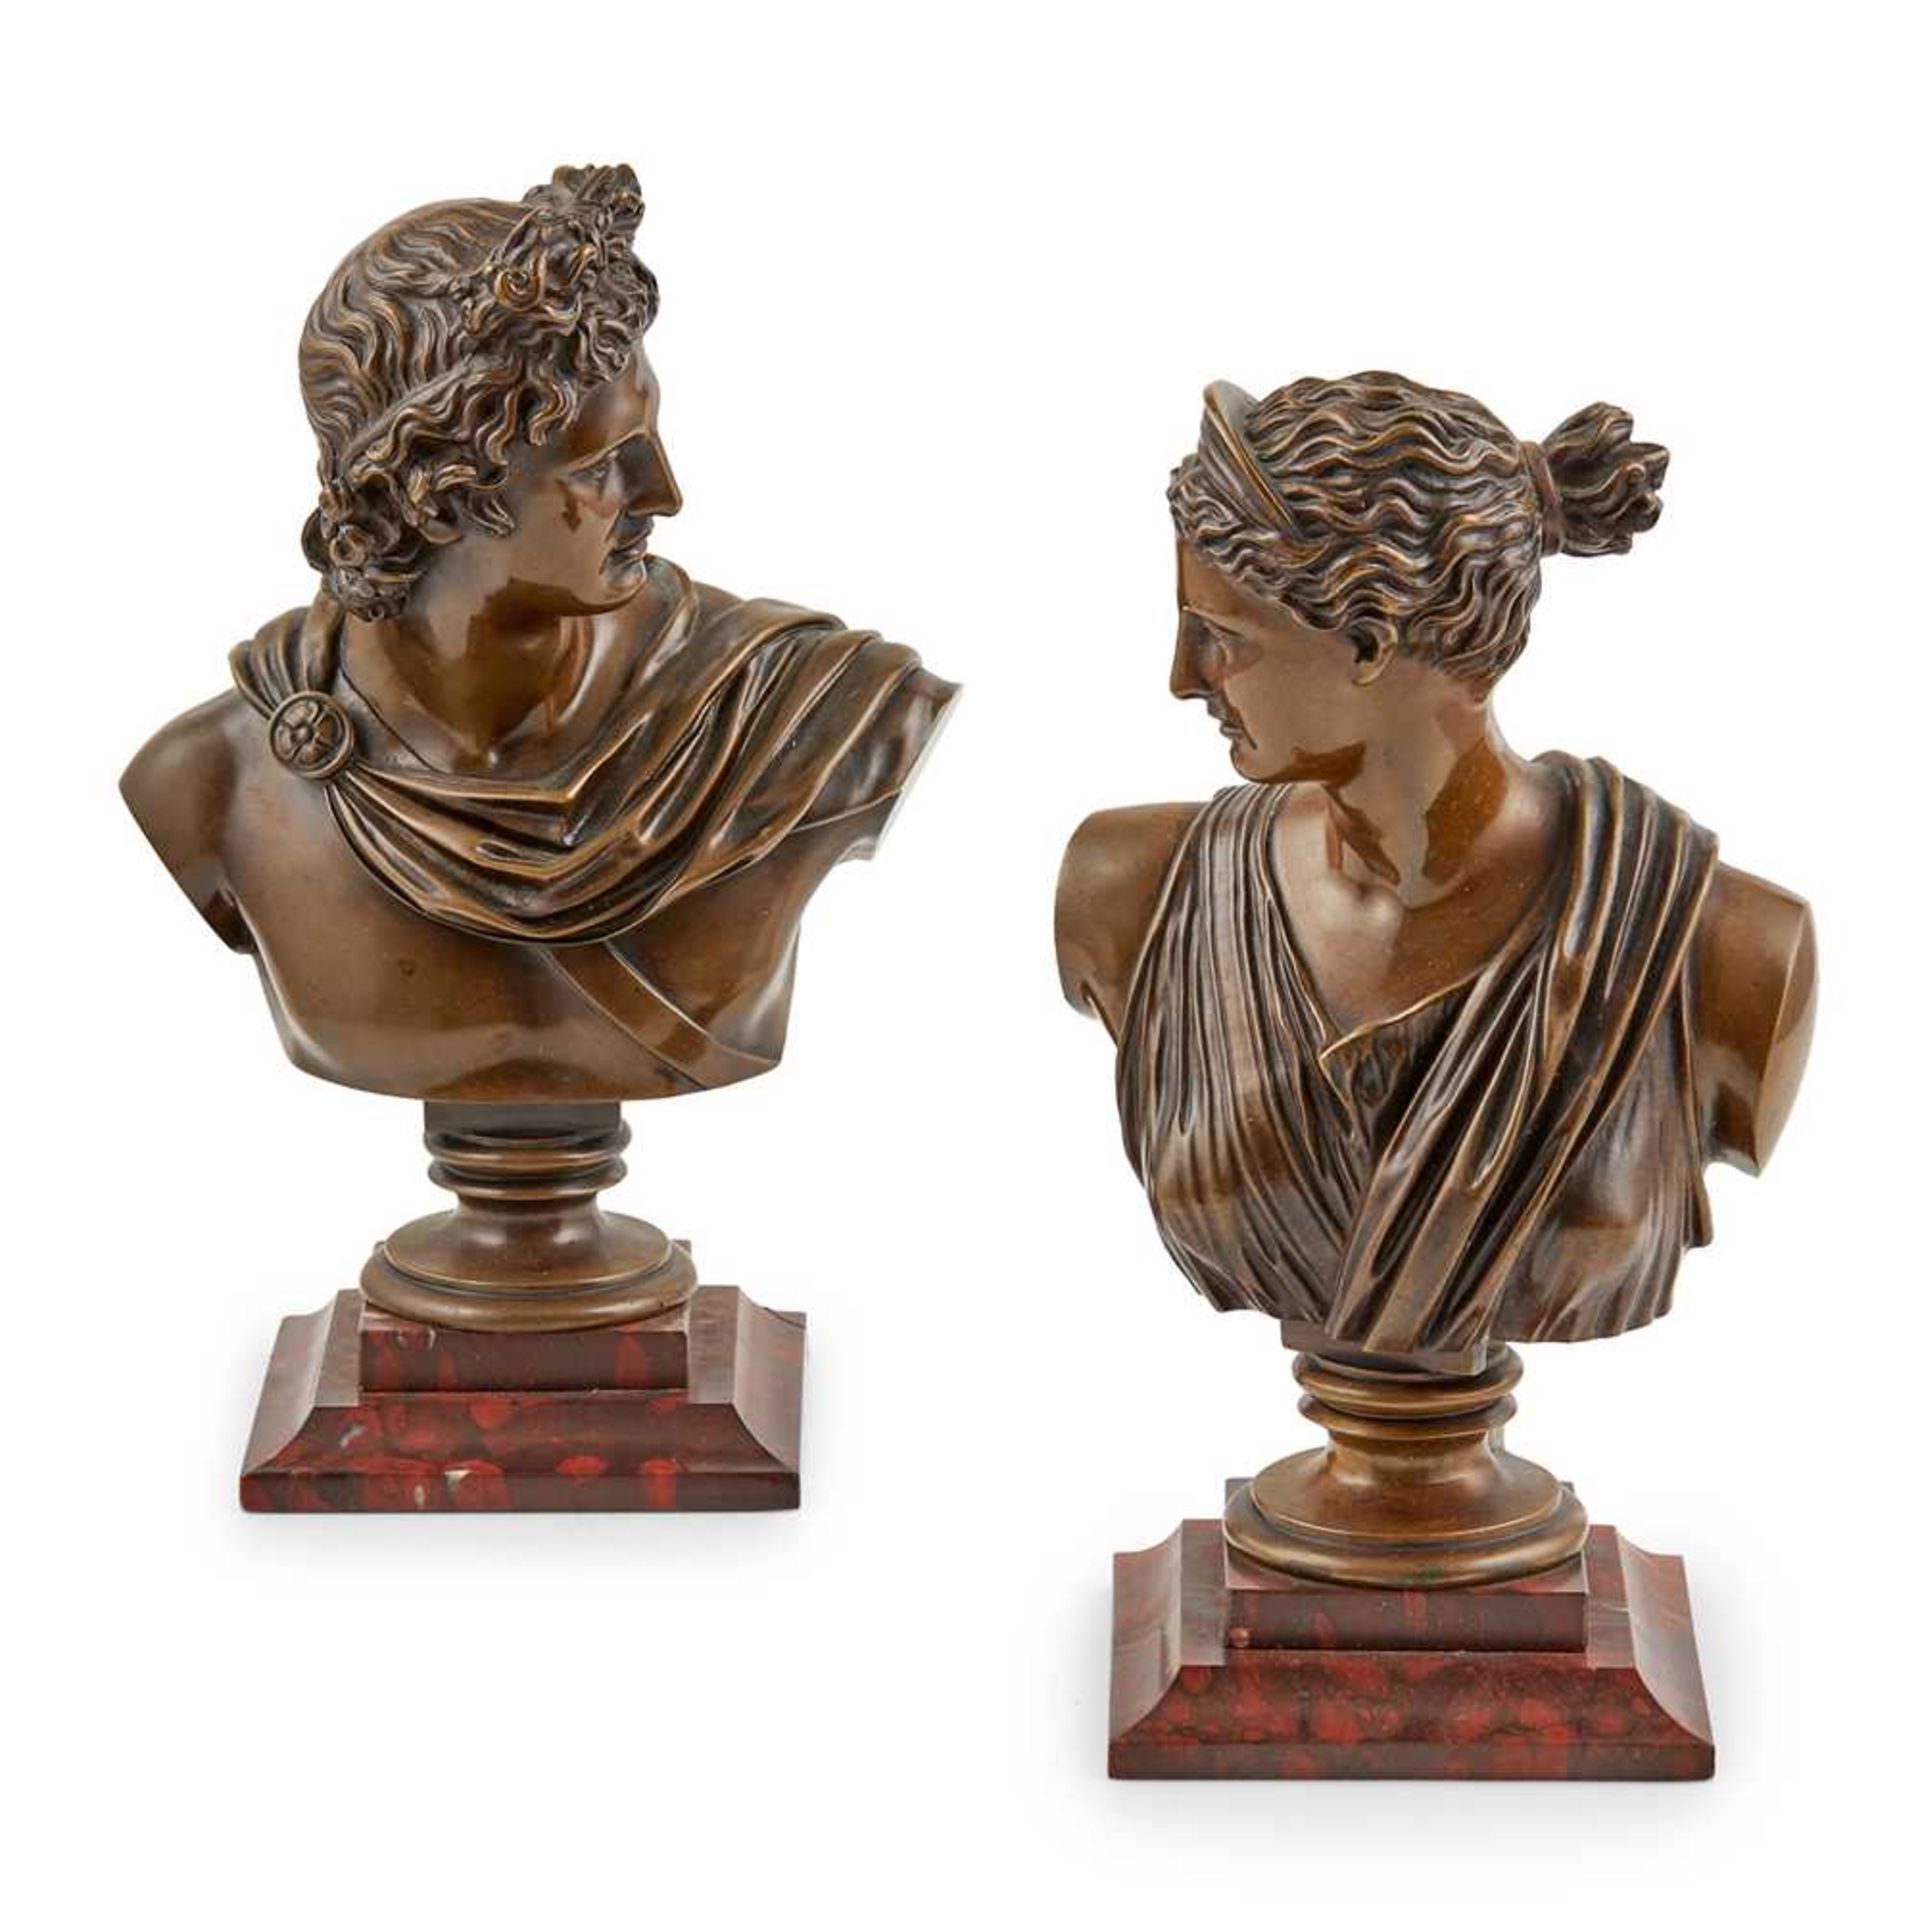 AFTER THE ANTIQUE, PAIR OF BUSTS APOLLO BELVEDERE AND DIANA THE HUNTRESS